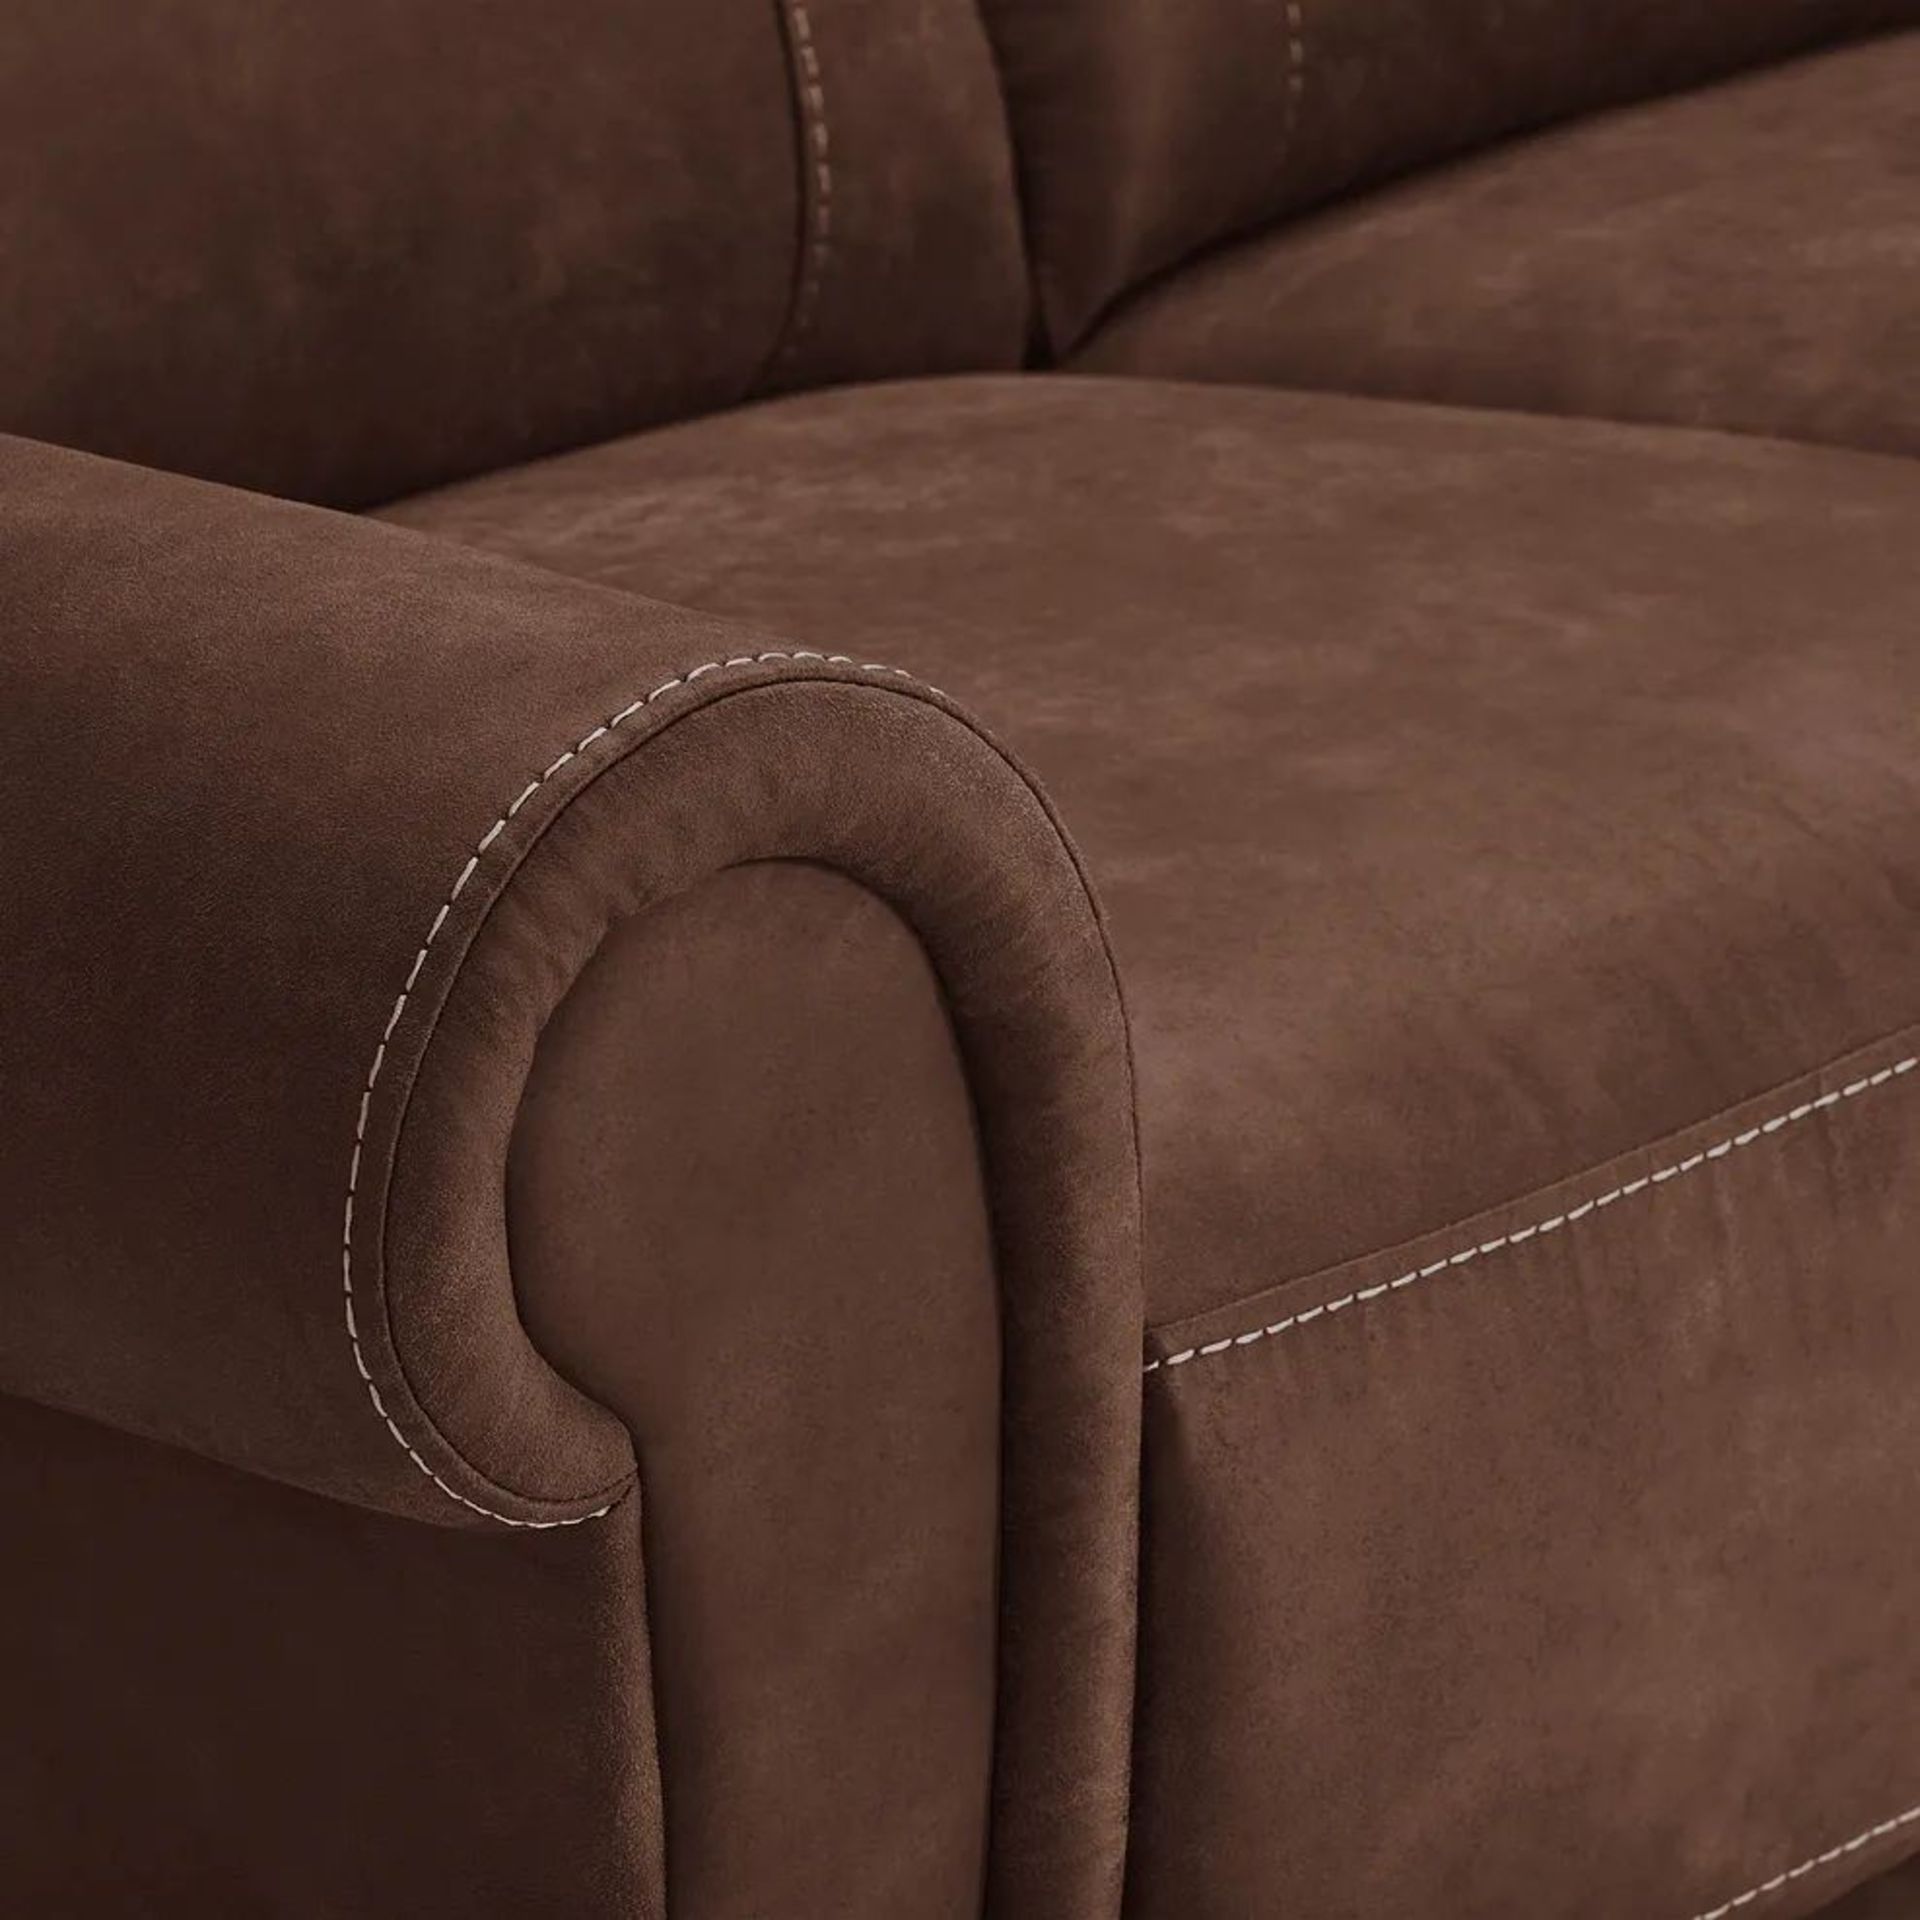 BRAND NEW COLORADO 3 Seater Sofa - DARK BROWN FABRIC. RRP £1099. Shown here in Ranch dark brown, our - Image 4 of 5